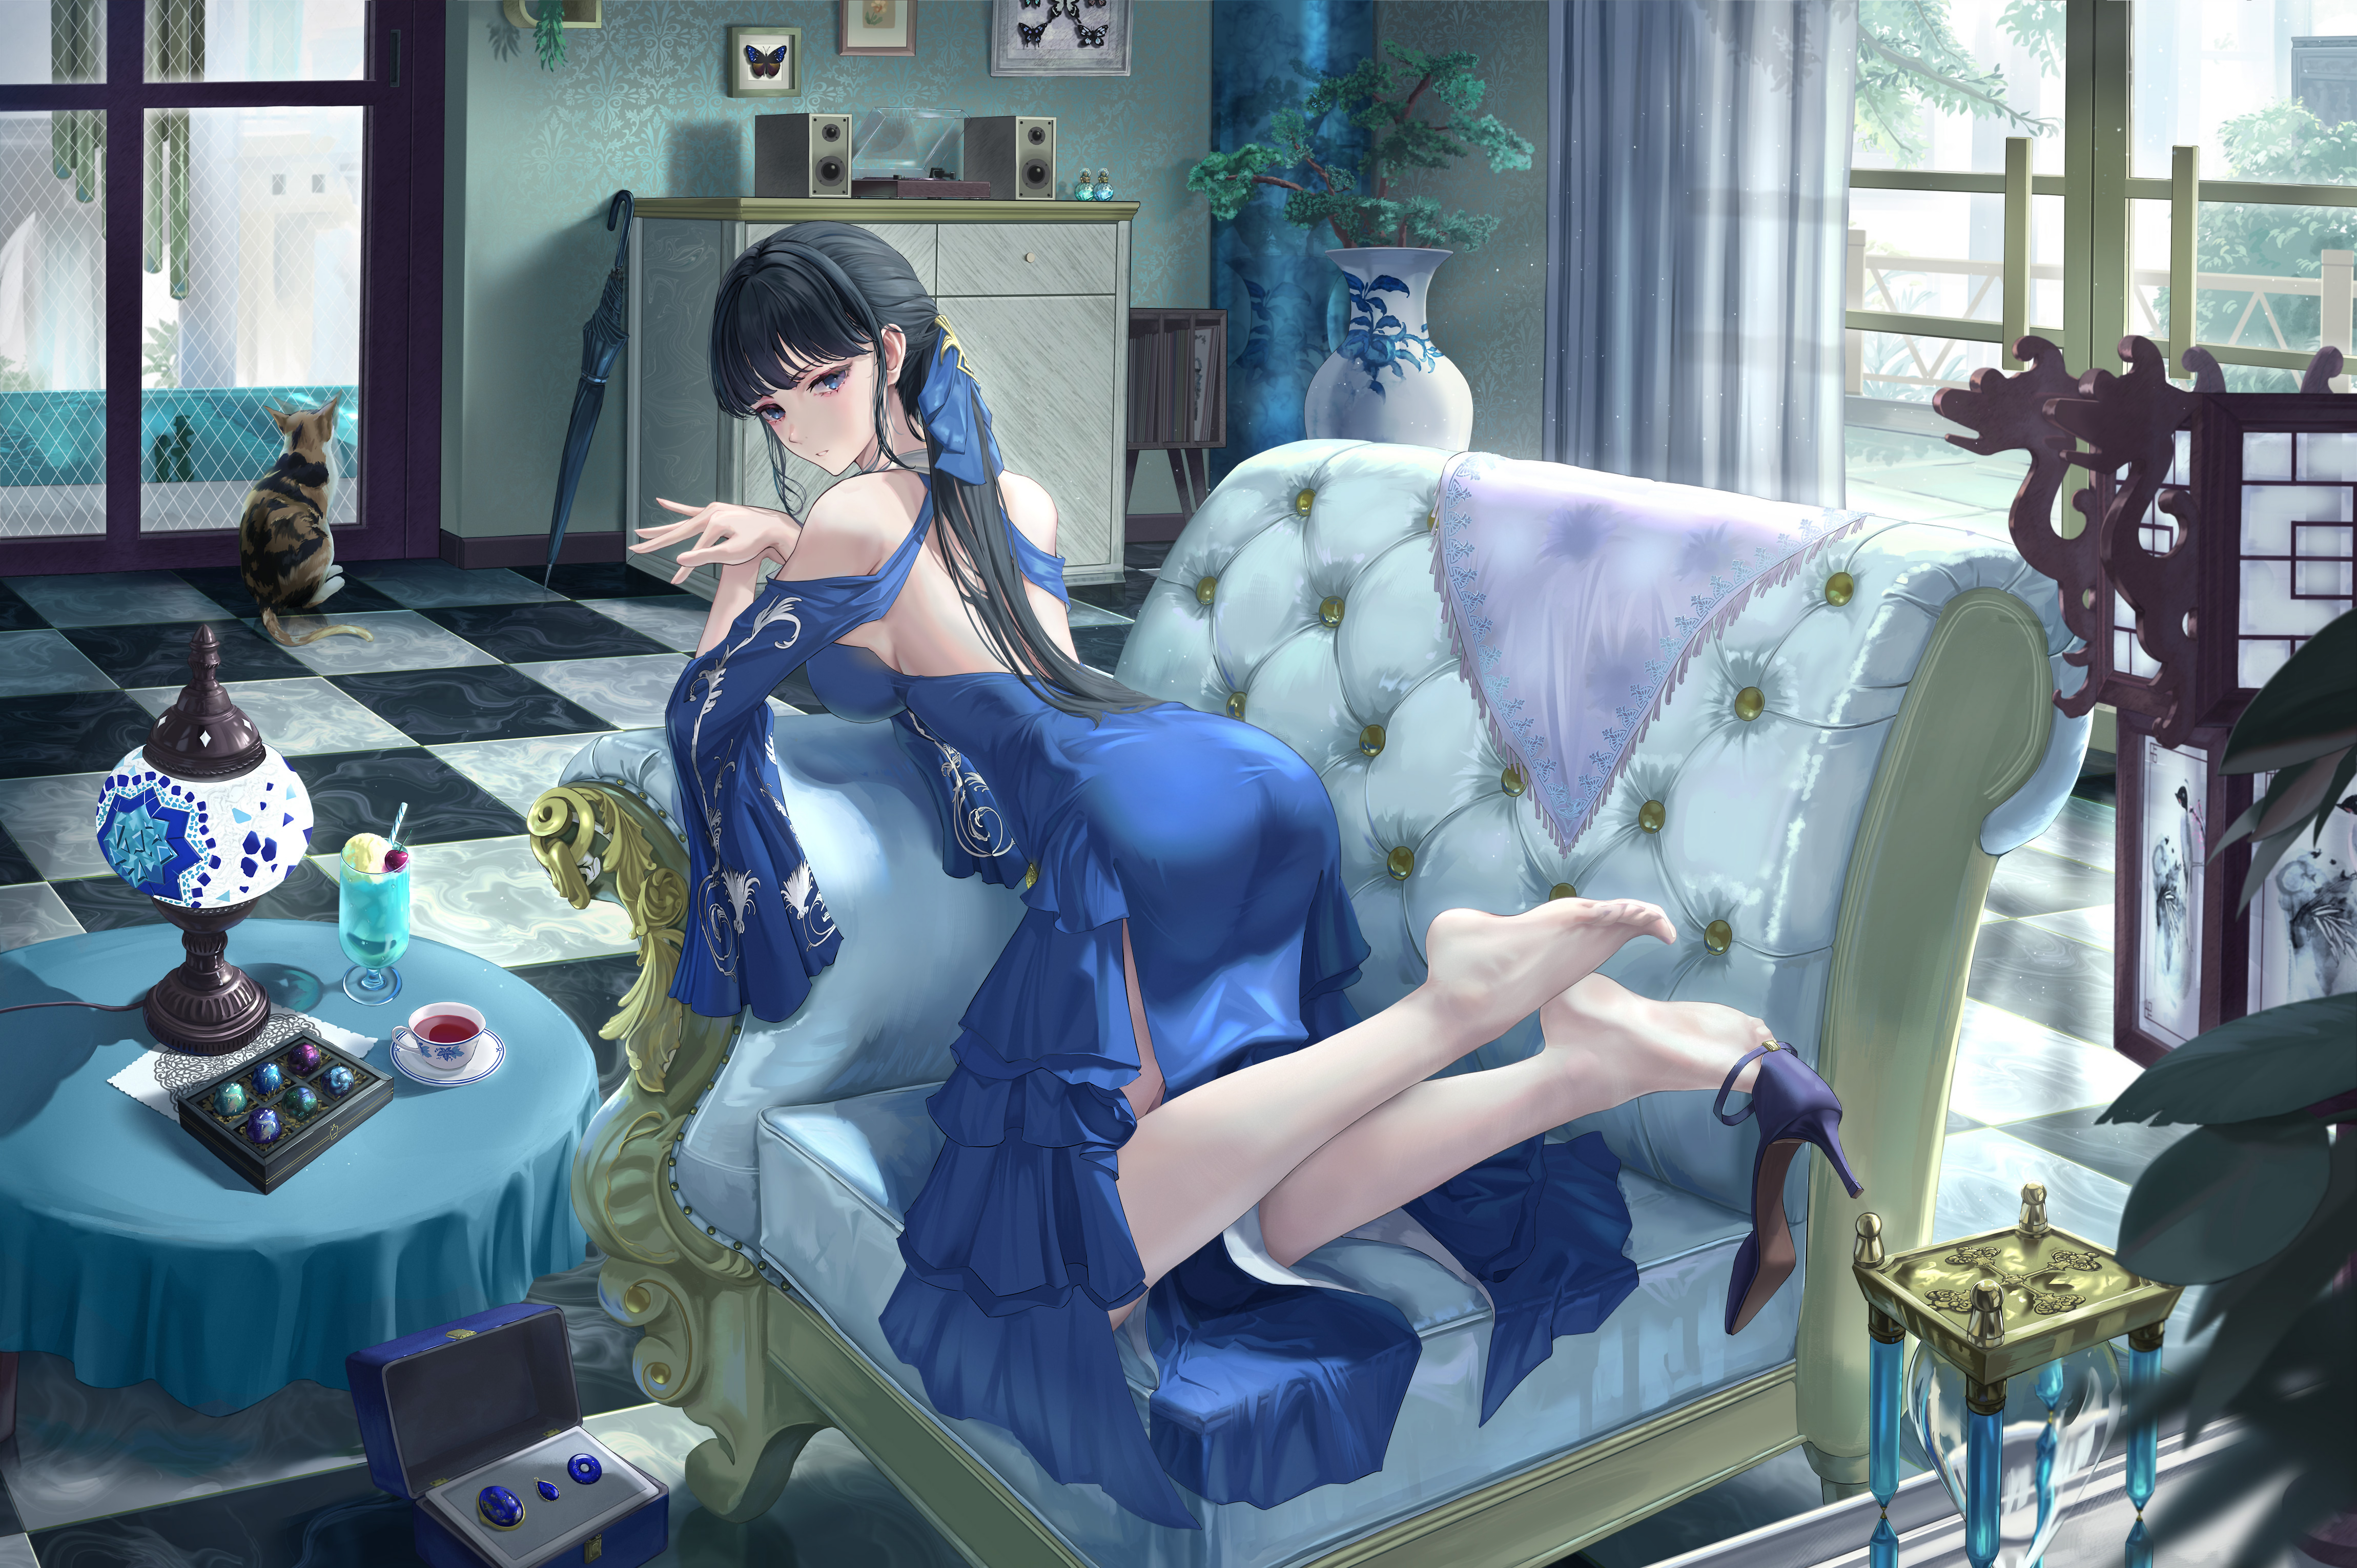 Anime Pixiv Dress Anime Girls Heels Long Hair Couch Drink Cup Candy Jewelry Looking At Viewer Leaves 4599x3060